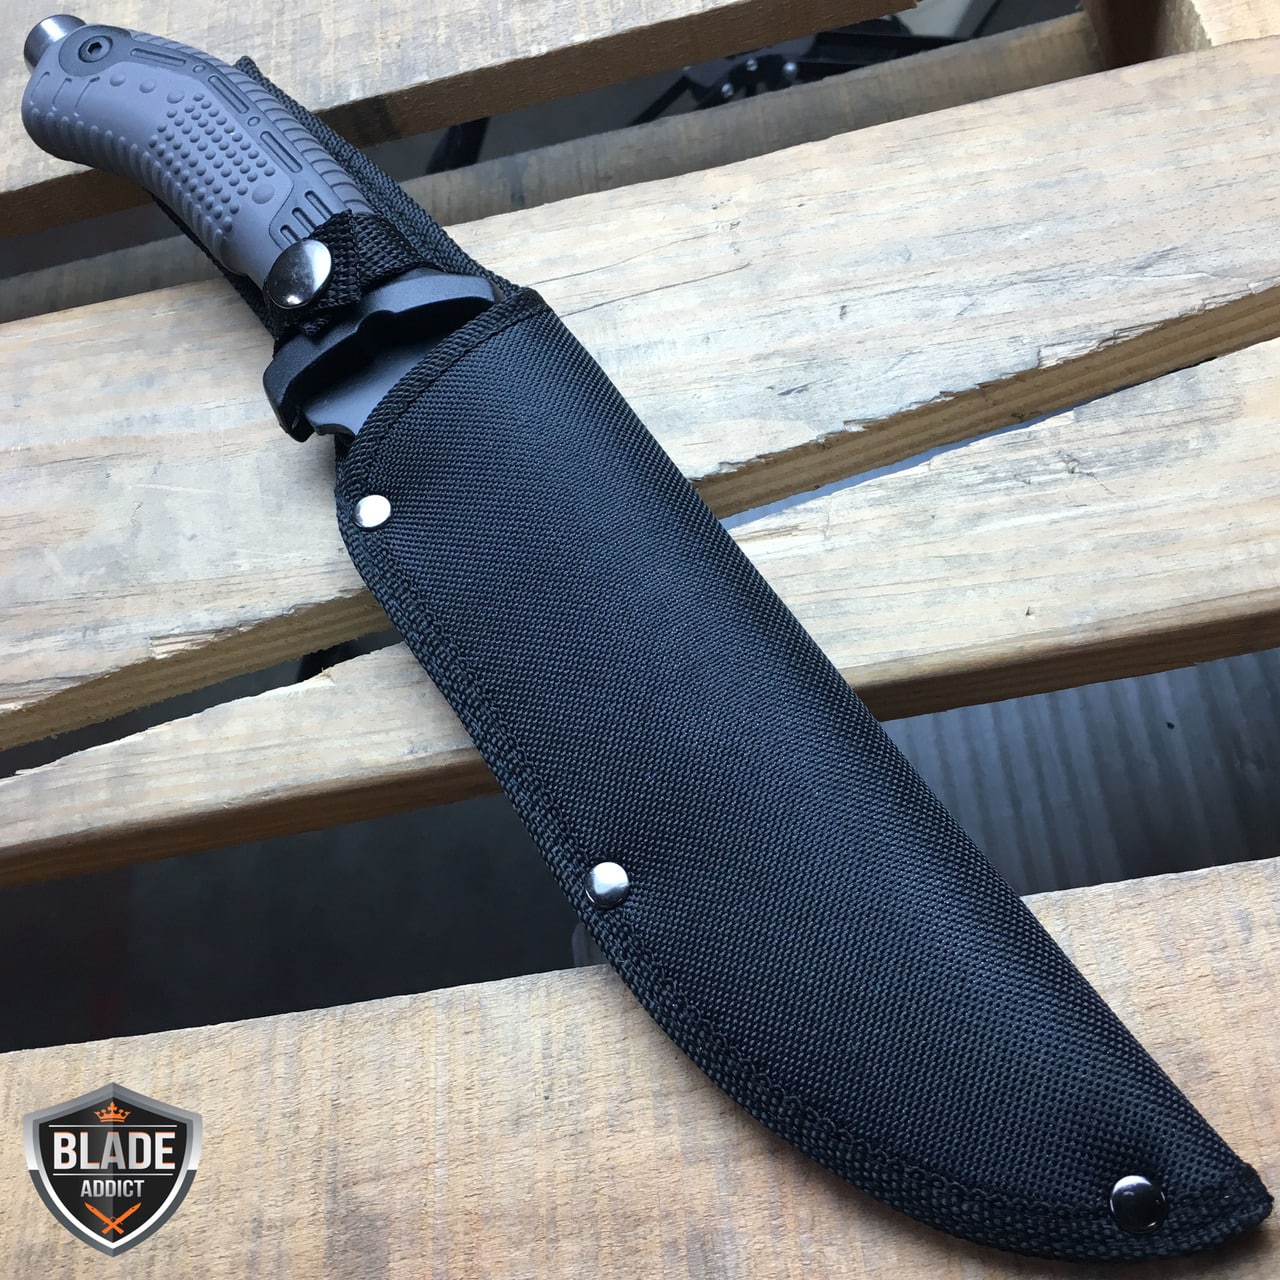 13" TACTICAL SURVIVAL Rambo Army Bowie FIXED BLADE KNIFE Hunting w/ SHEATH NEW